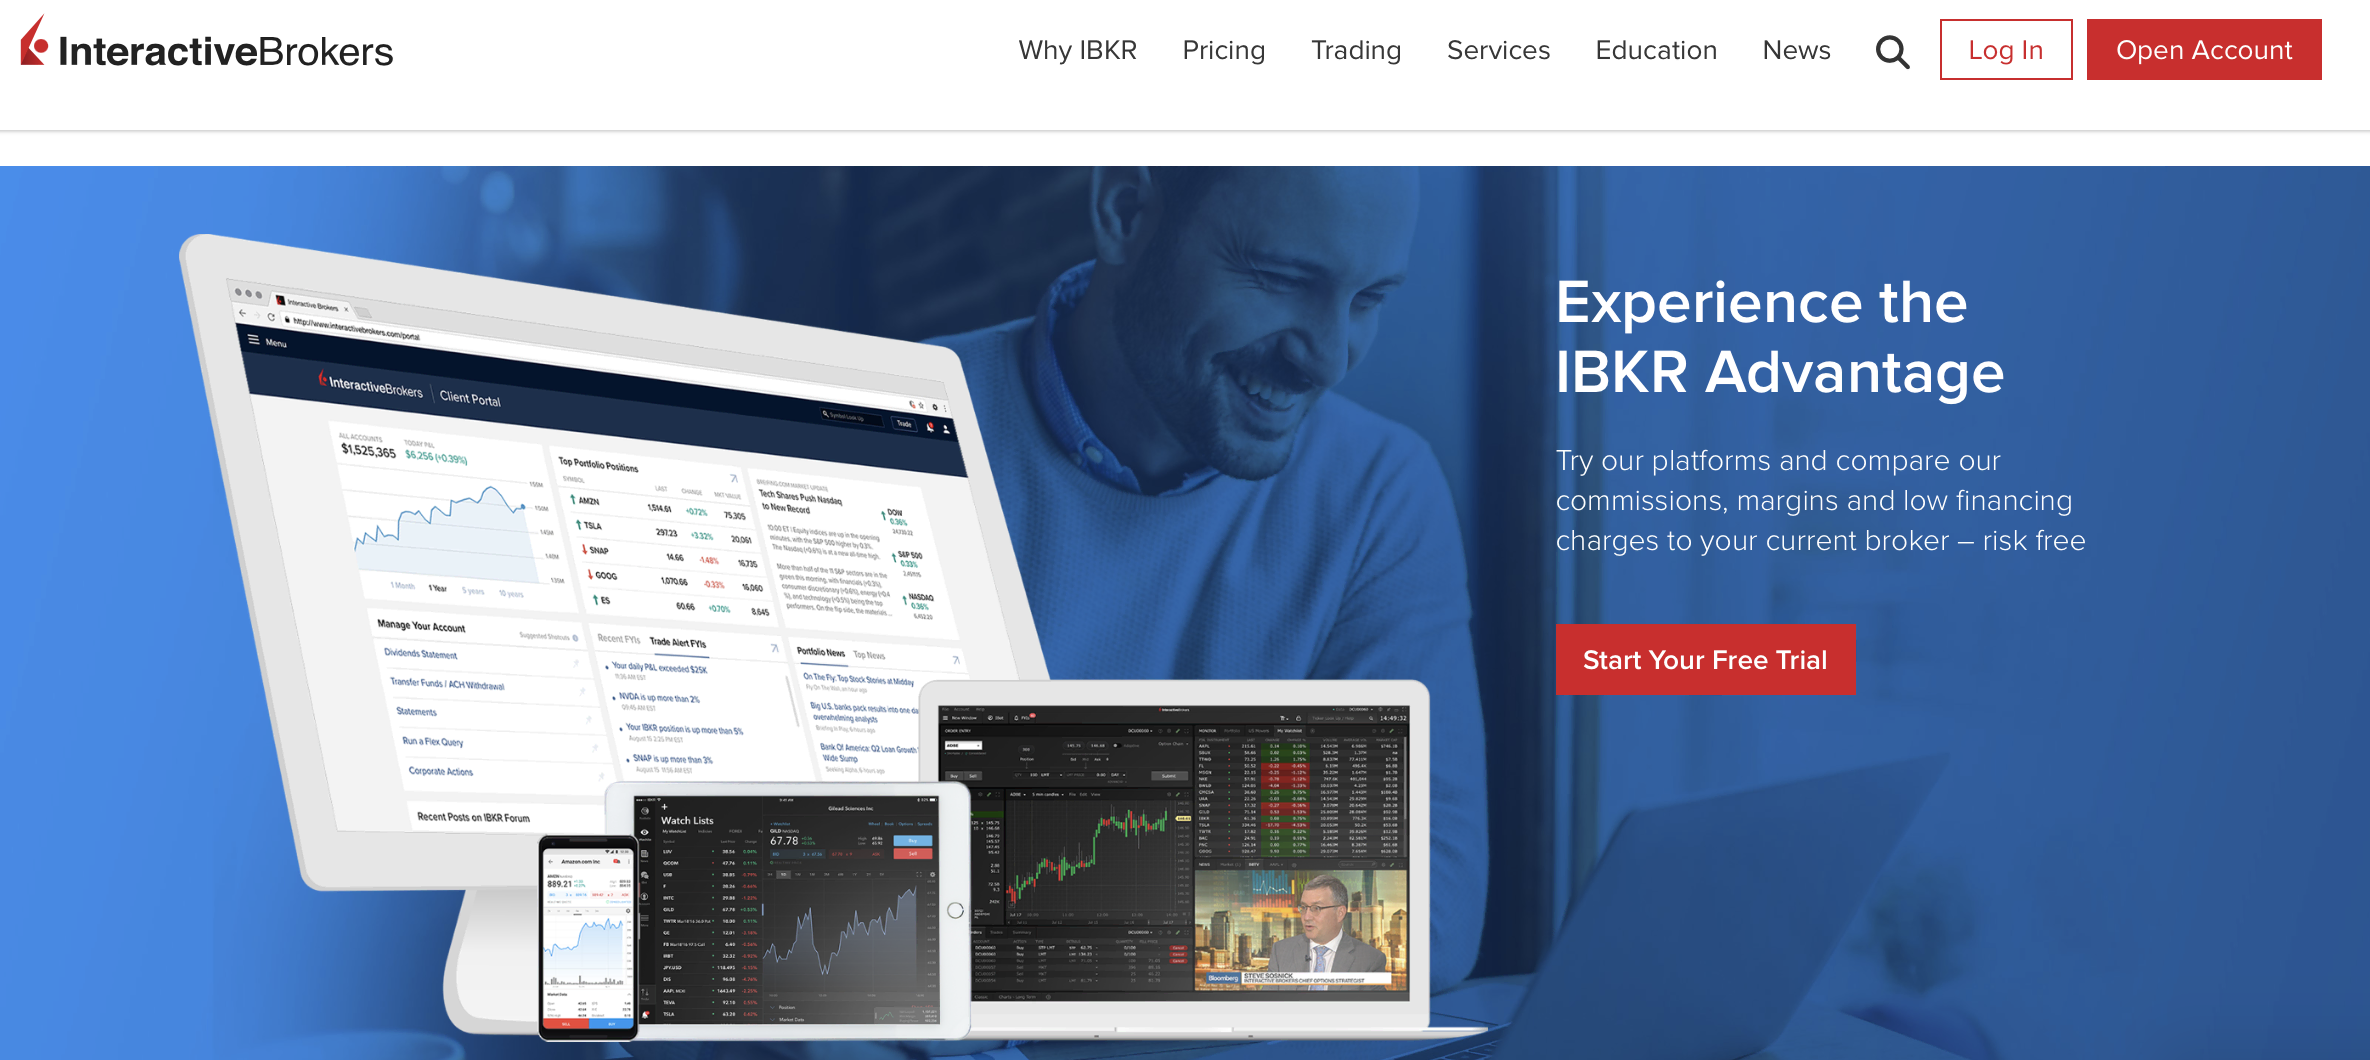 Opening a demo account on Interactive Brokers